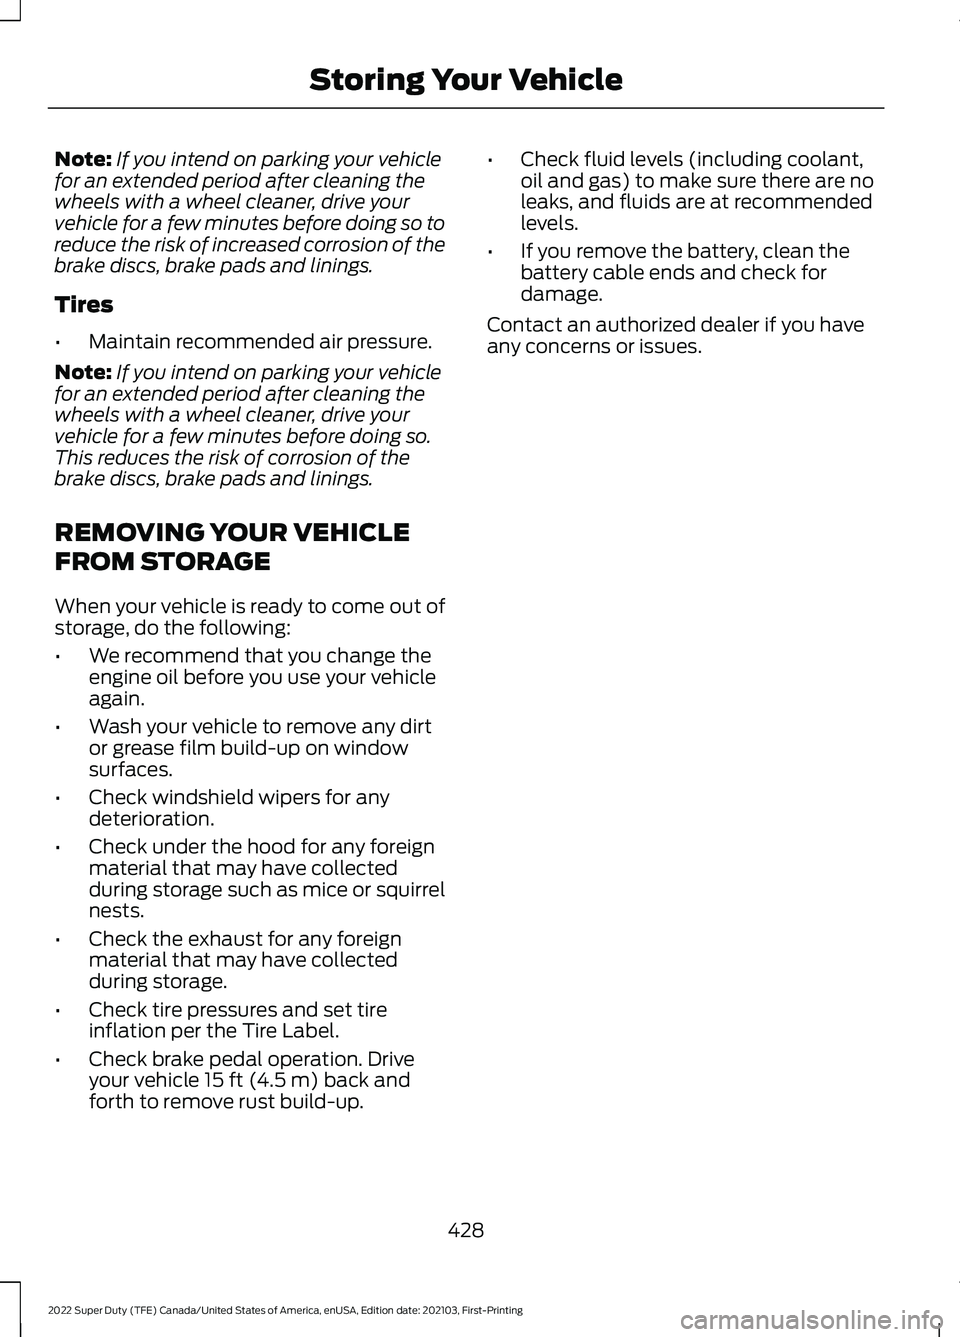 FORD F-600 2022  Owners Manual Note:
If you intend on parking your vehicle
for an extended period after cleaning the
wheels with a wheel cleaner, drive your
vehicle for a few minutes before doing so to
reduce the risk of increased 